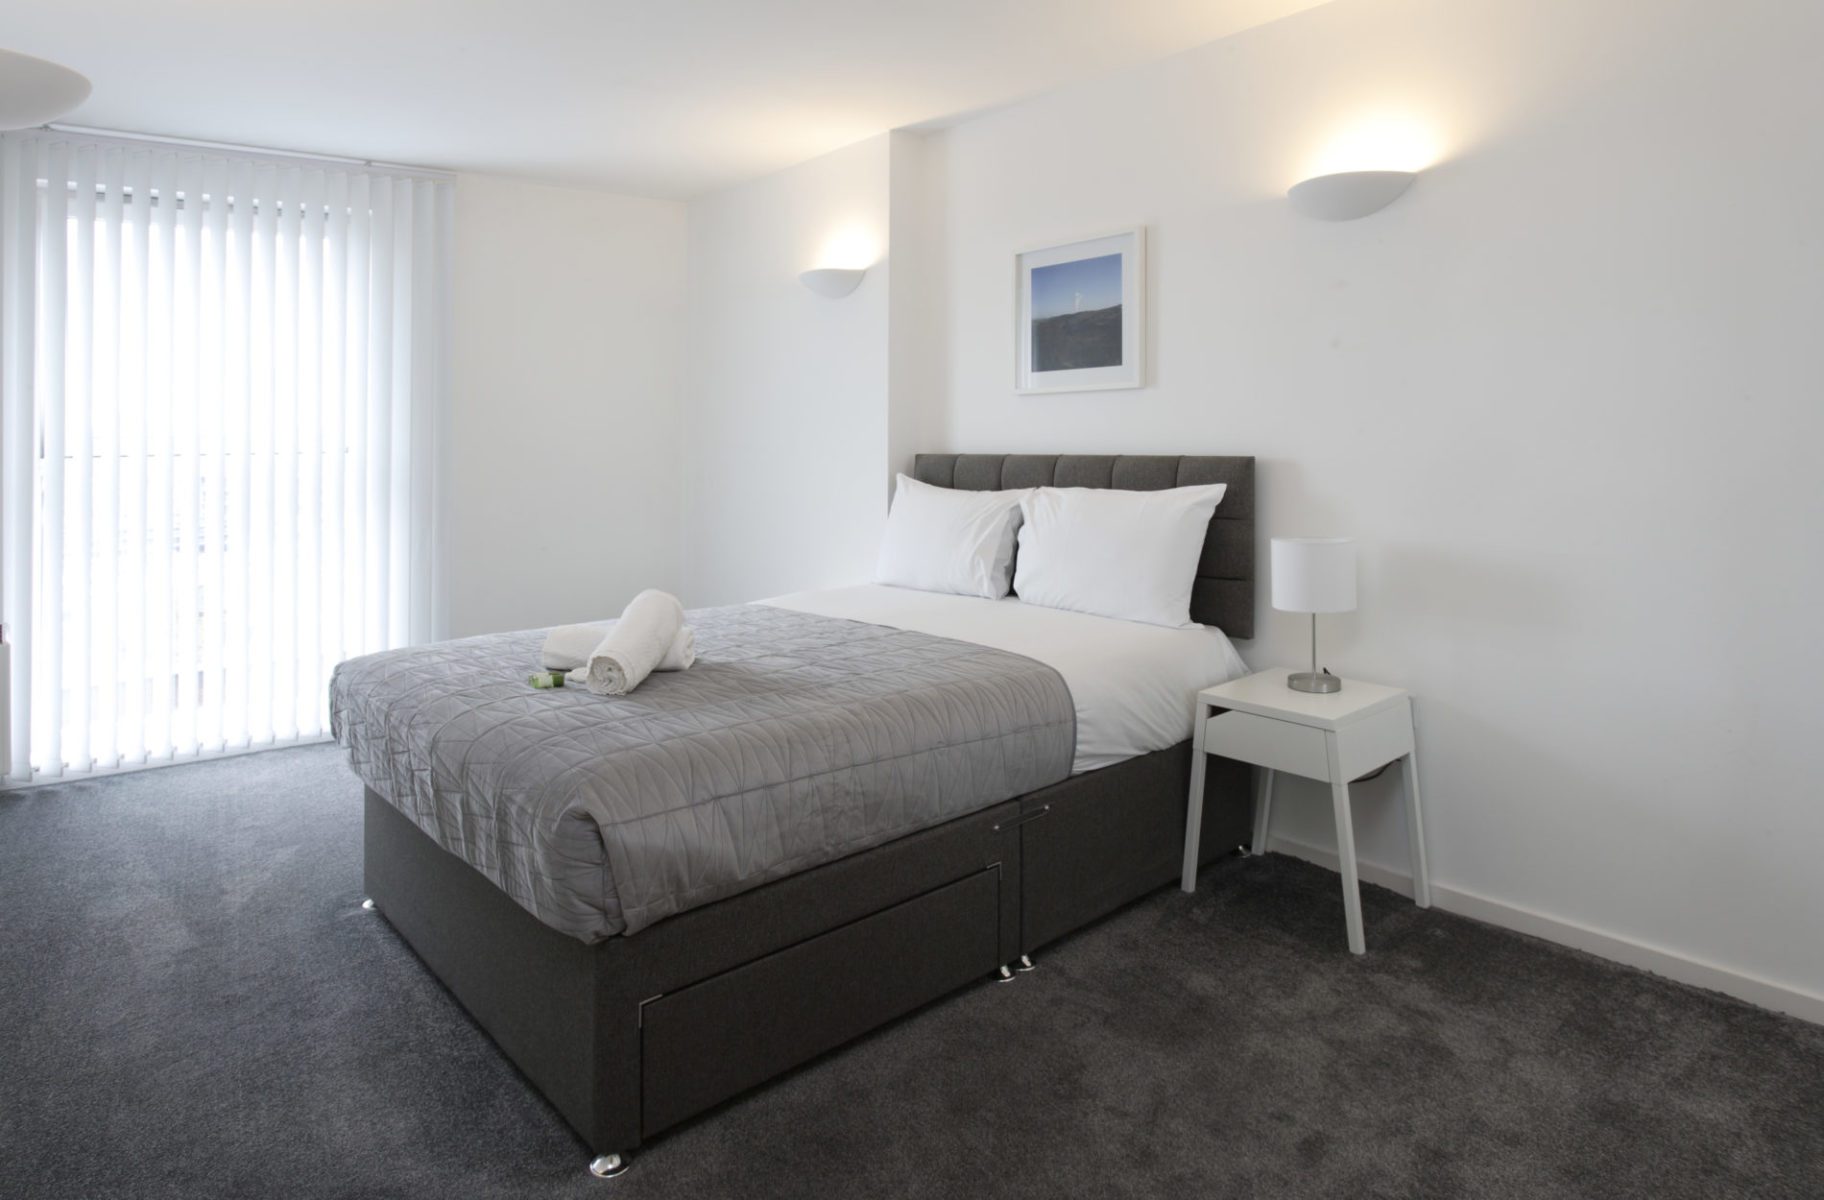 Manchester city centre apartment, bedroom